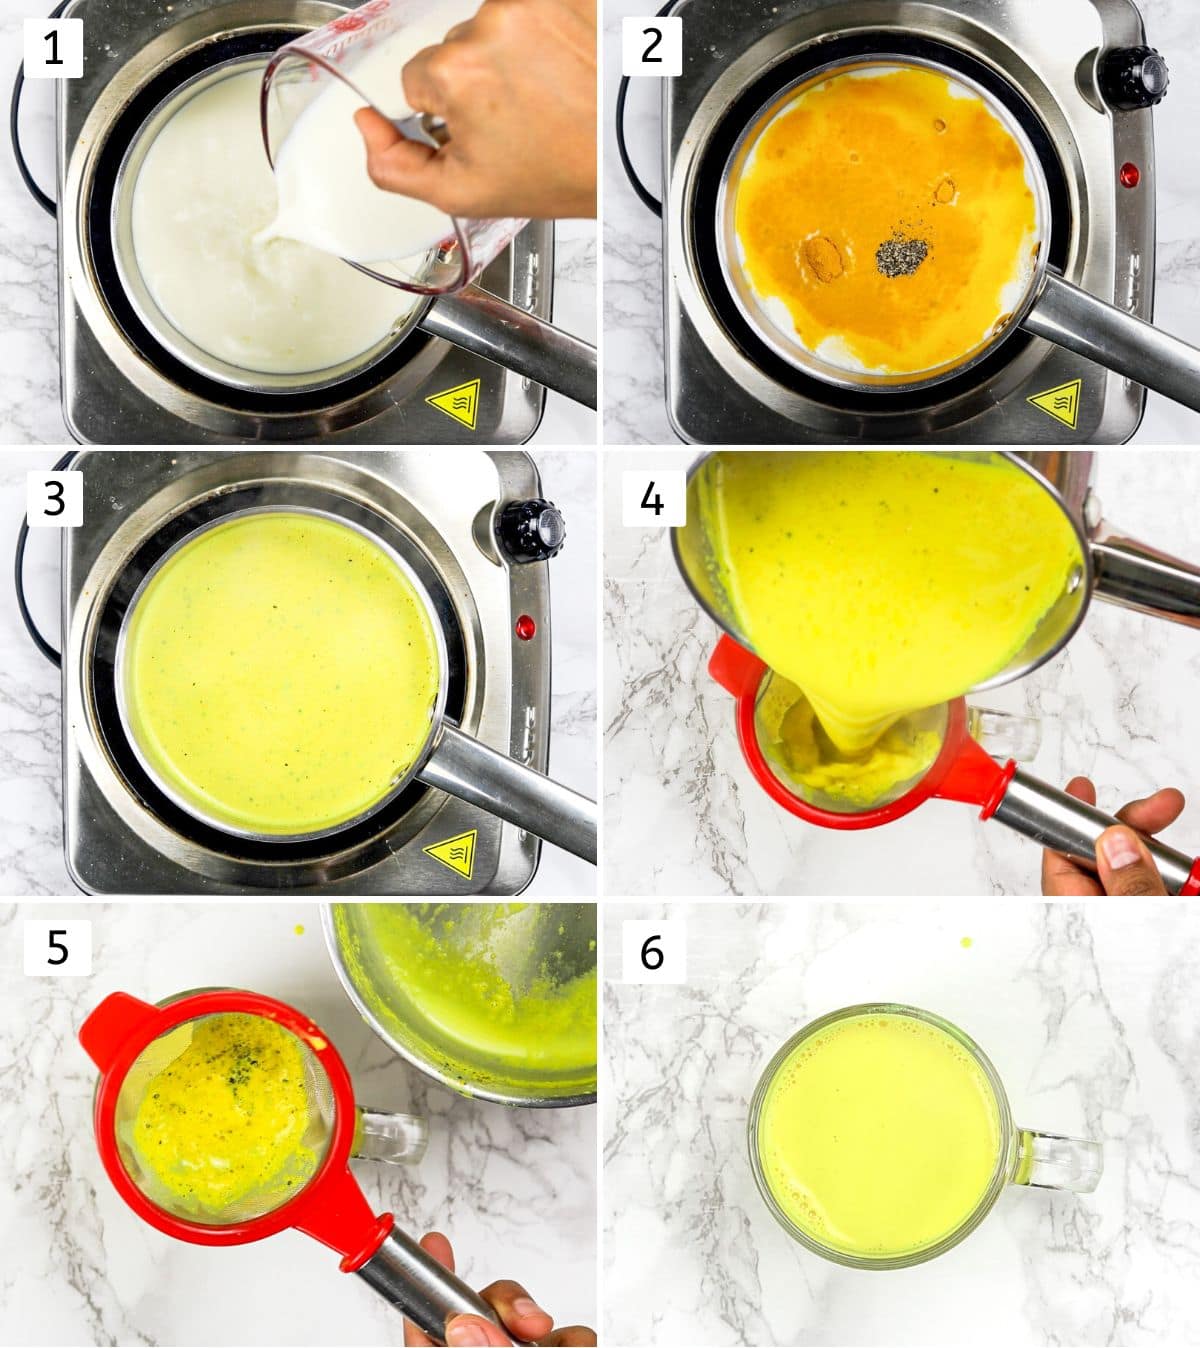 Collage of 6 steps showing adding milk and turmeric, pepper to saucepan, simmering, straining in a cup.